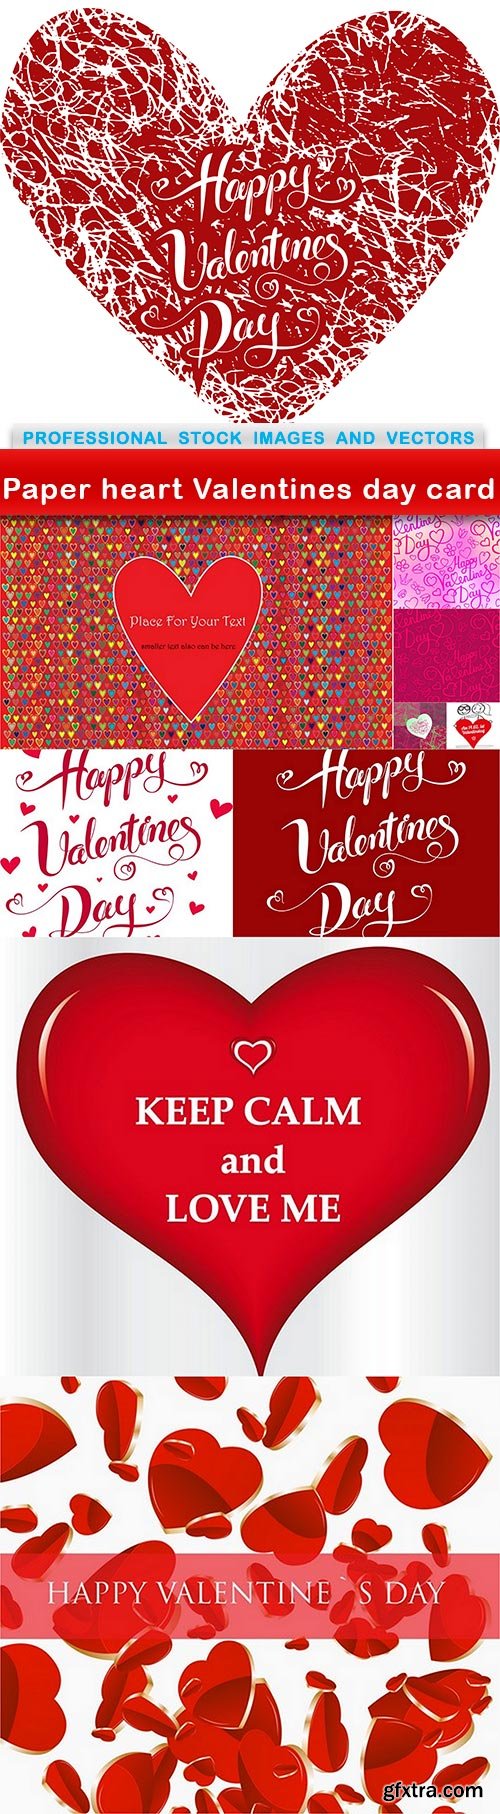 Paper heart Valentines day card - 10 EPS